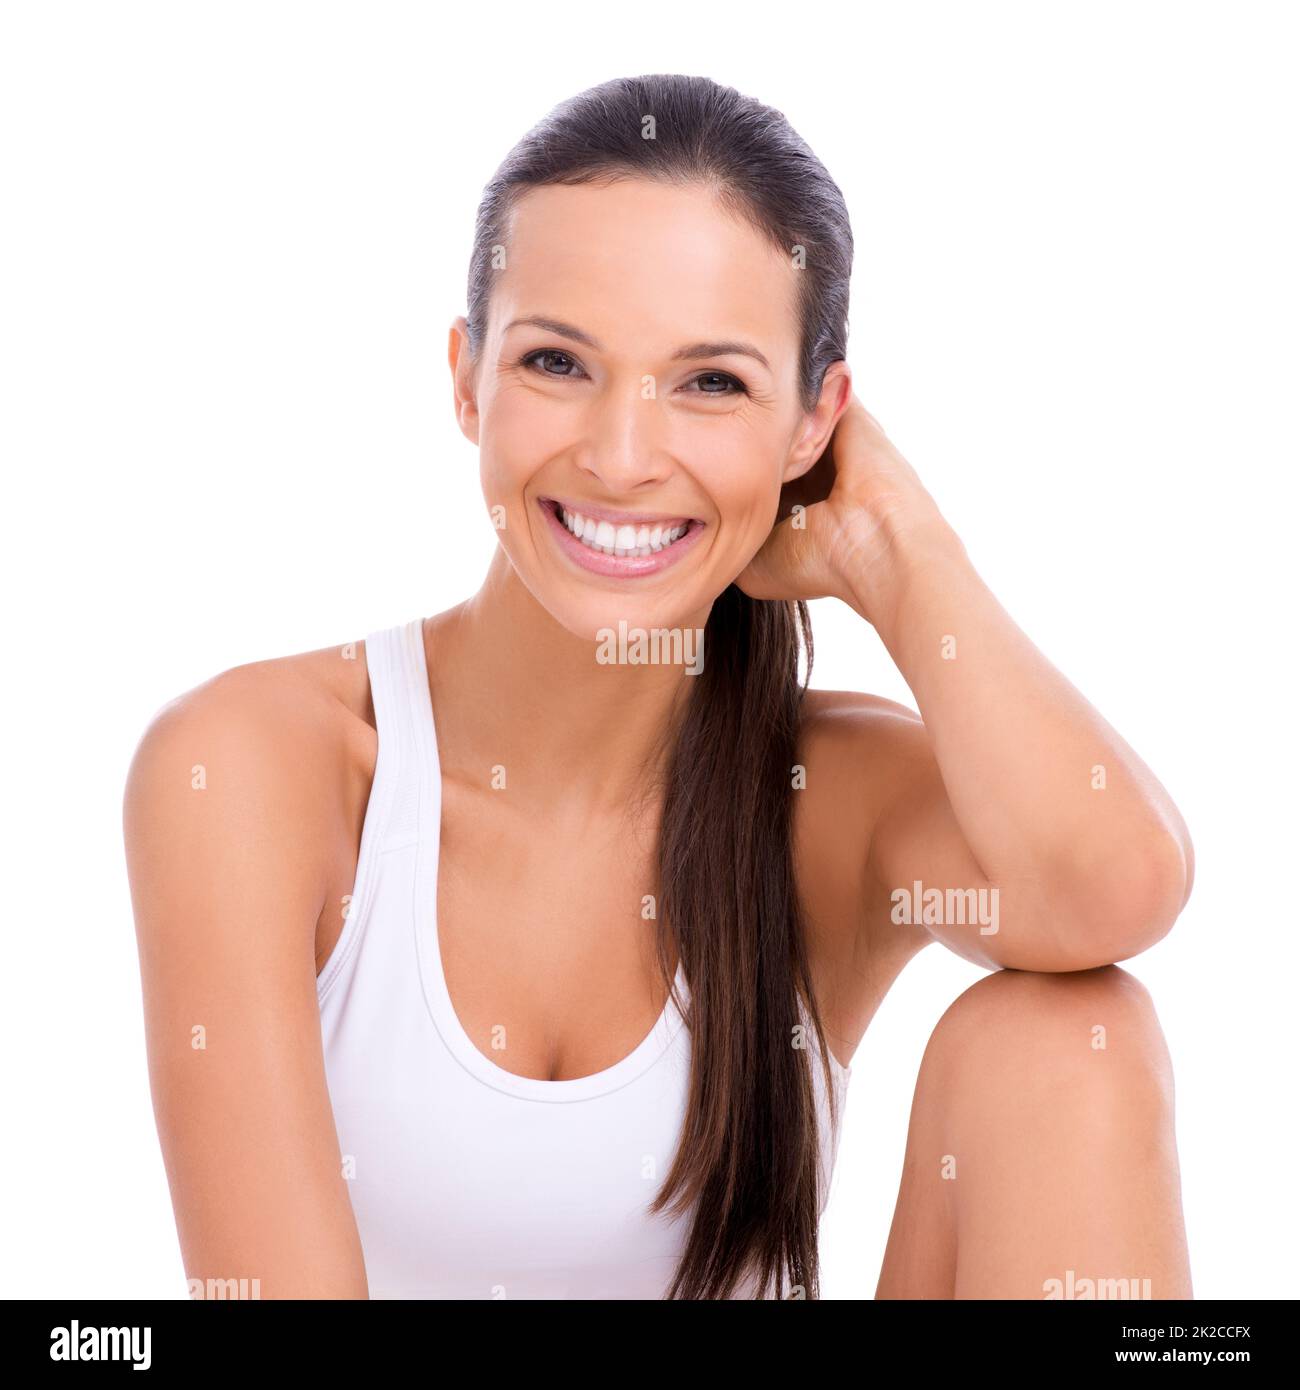 Picture of health and vitality. Studio portrait of an attractive woman in exercise clothing isolated on white. Stock Photo